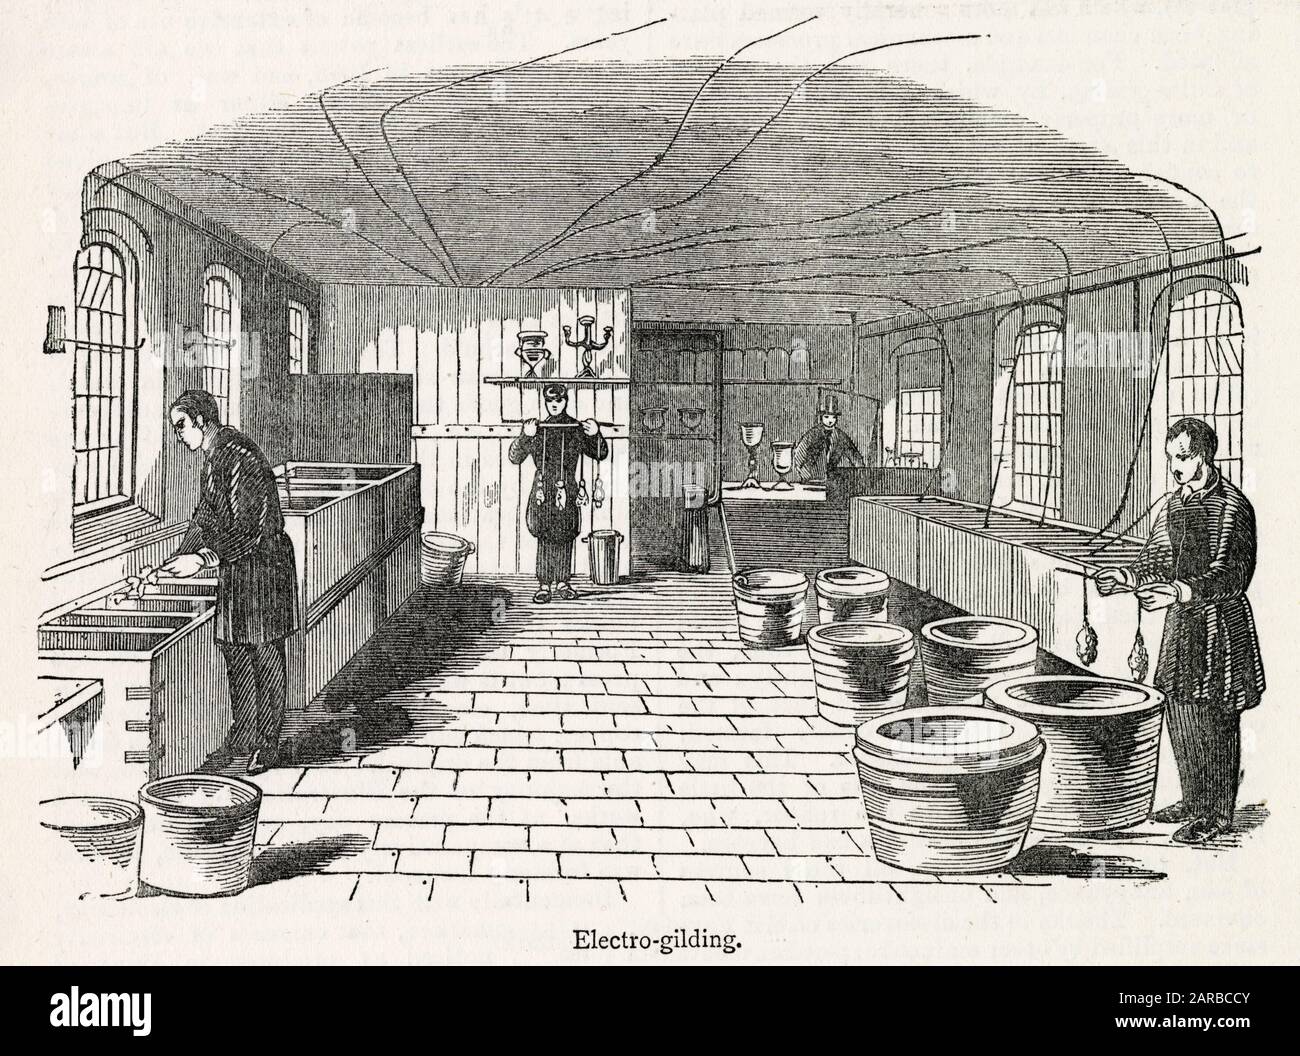 The silver deposit room at Elkington's Electro-plate Factory, Birmingham. The objects to be plated are connected to an electrical cable (routed across the ceiling) and then immersed into tanks containing a solution of silver and potassium cyanide salts.     Date: 1844 Stock Photo